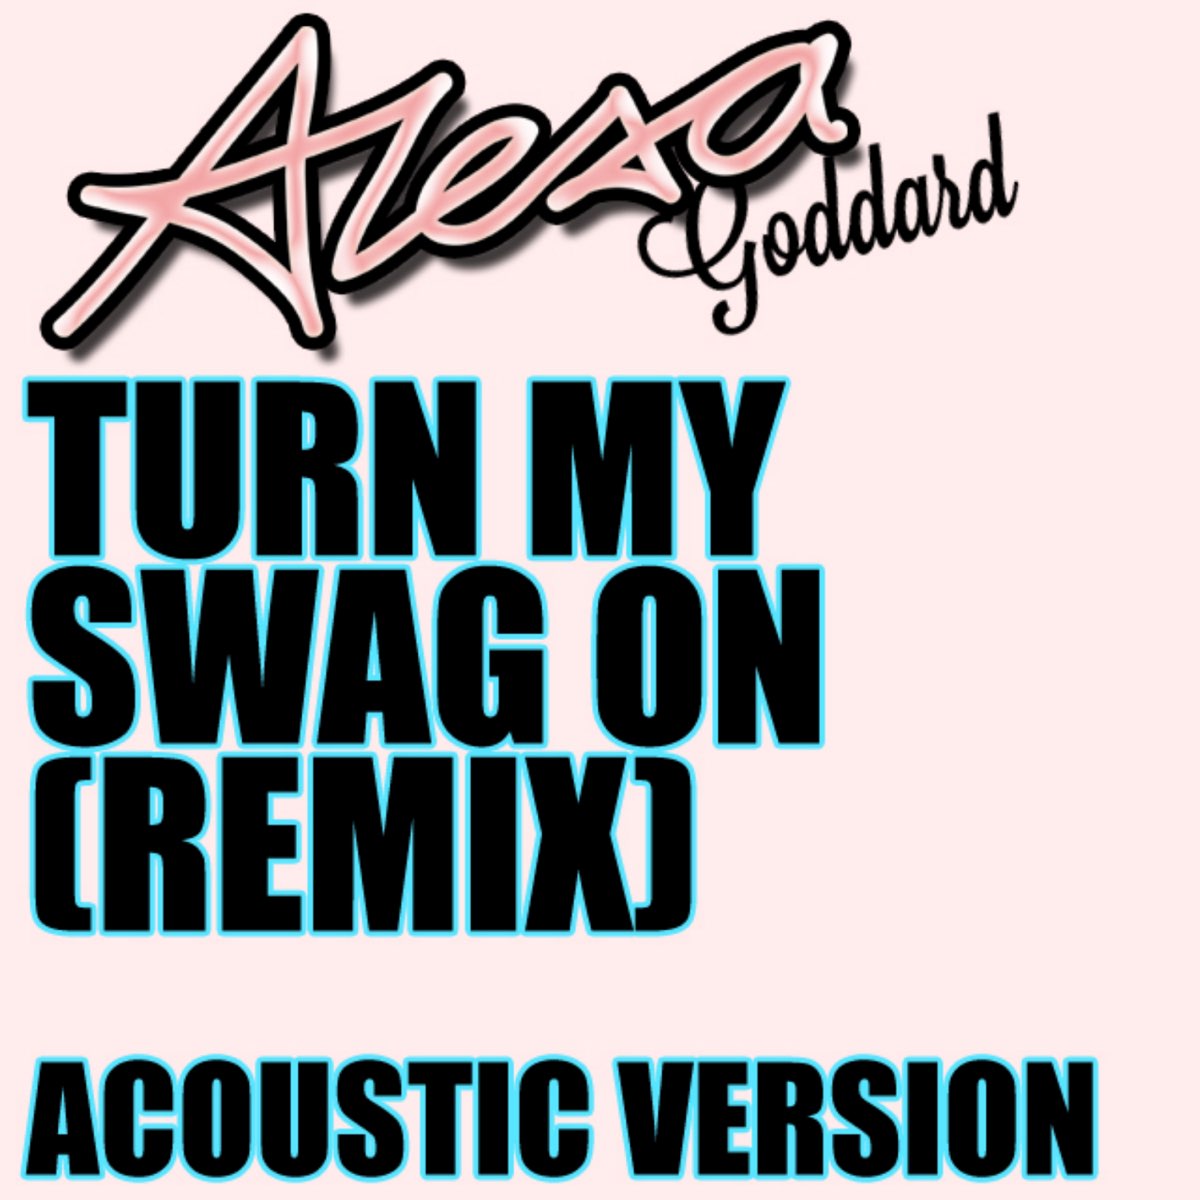 Turn My On (Remix) Single (Acoustic Version) by Alexa on Apple Music